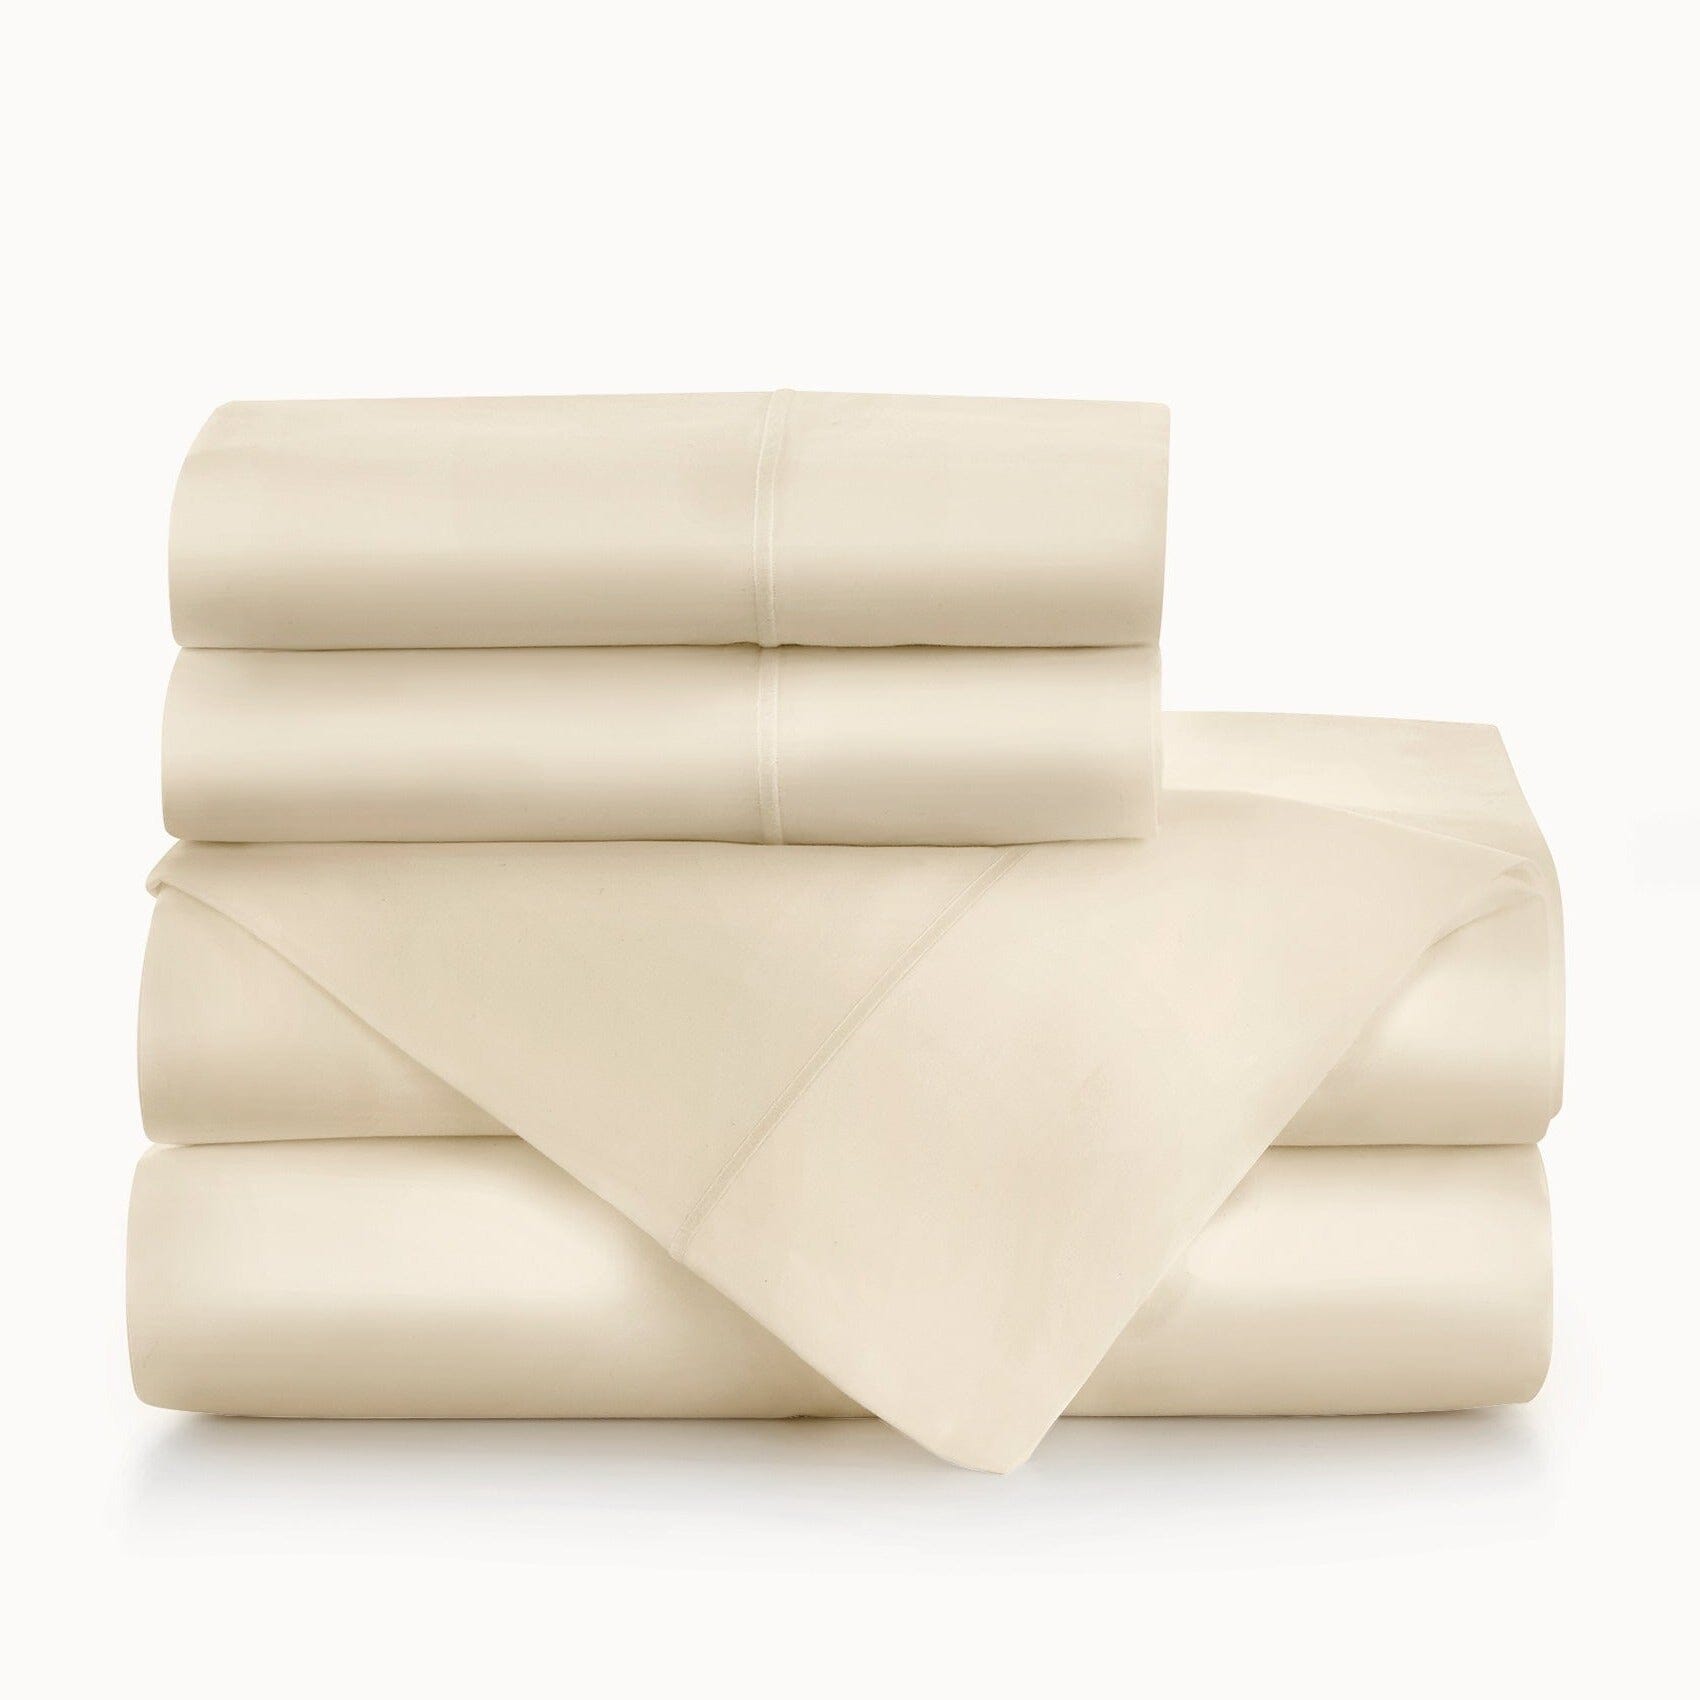 Stack of Bedding - Soprano Linen Bedding - Peacock Alley Cotton Sateen at Fig Linens and Home